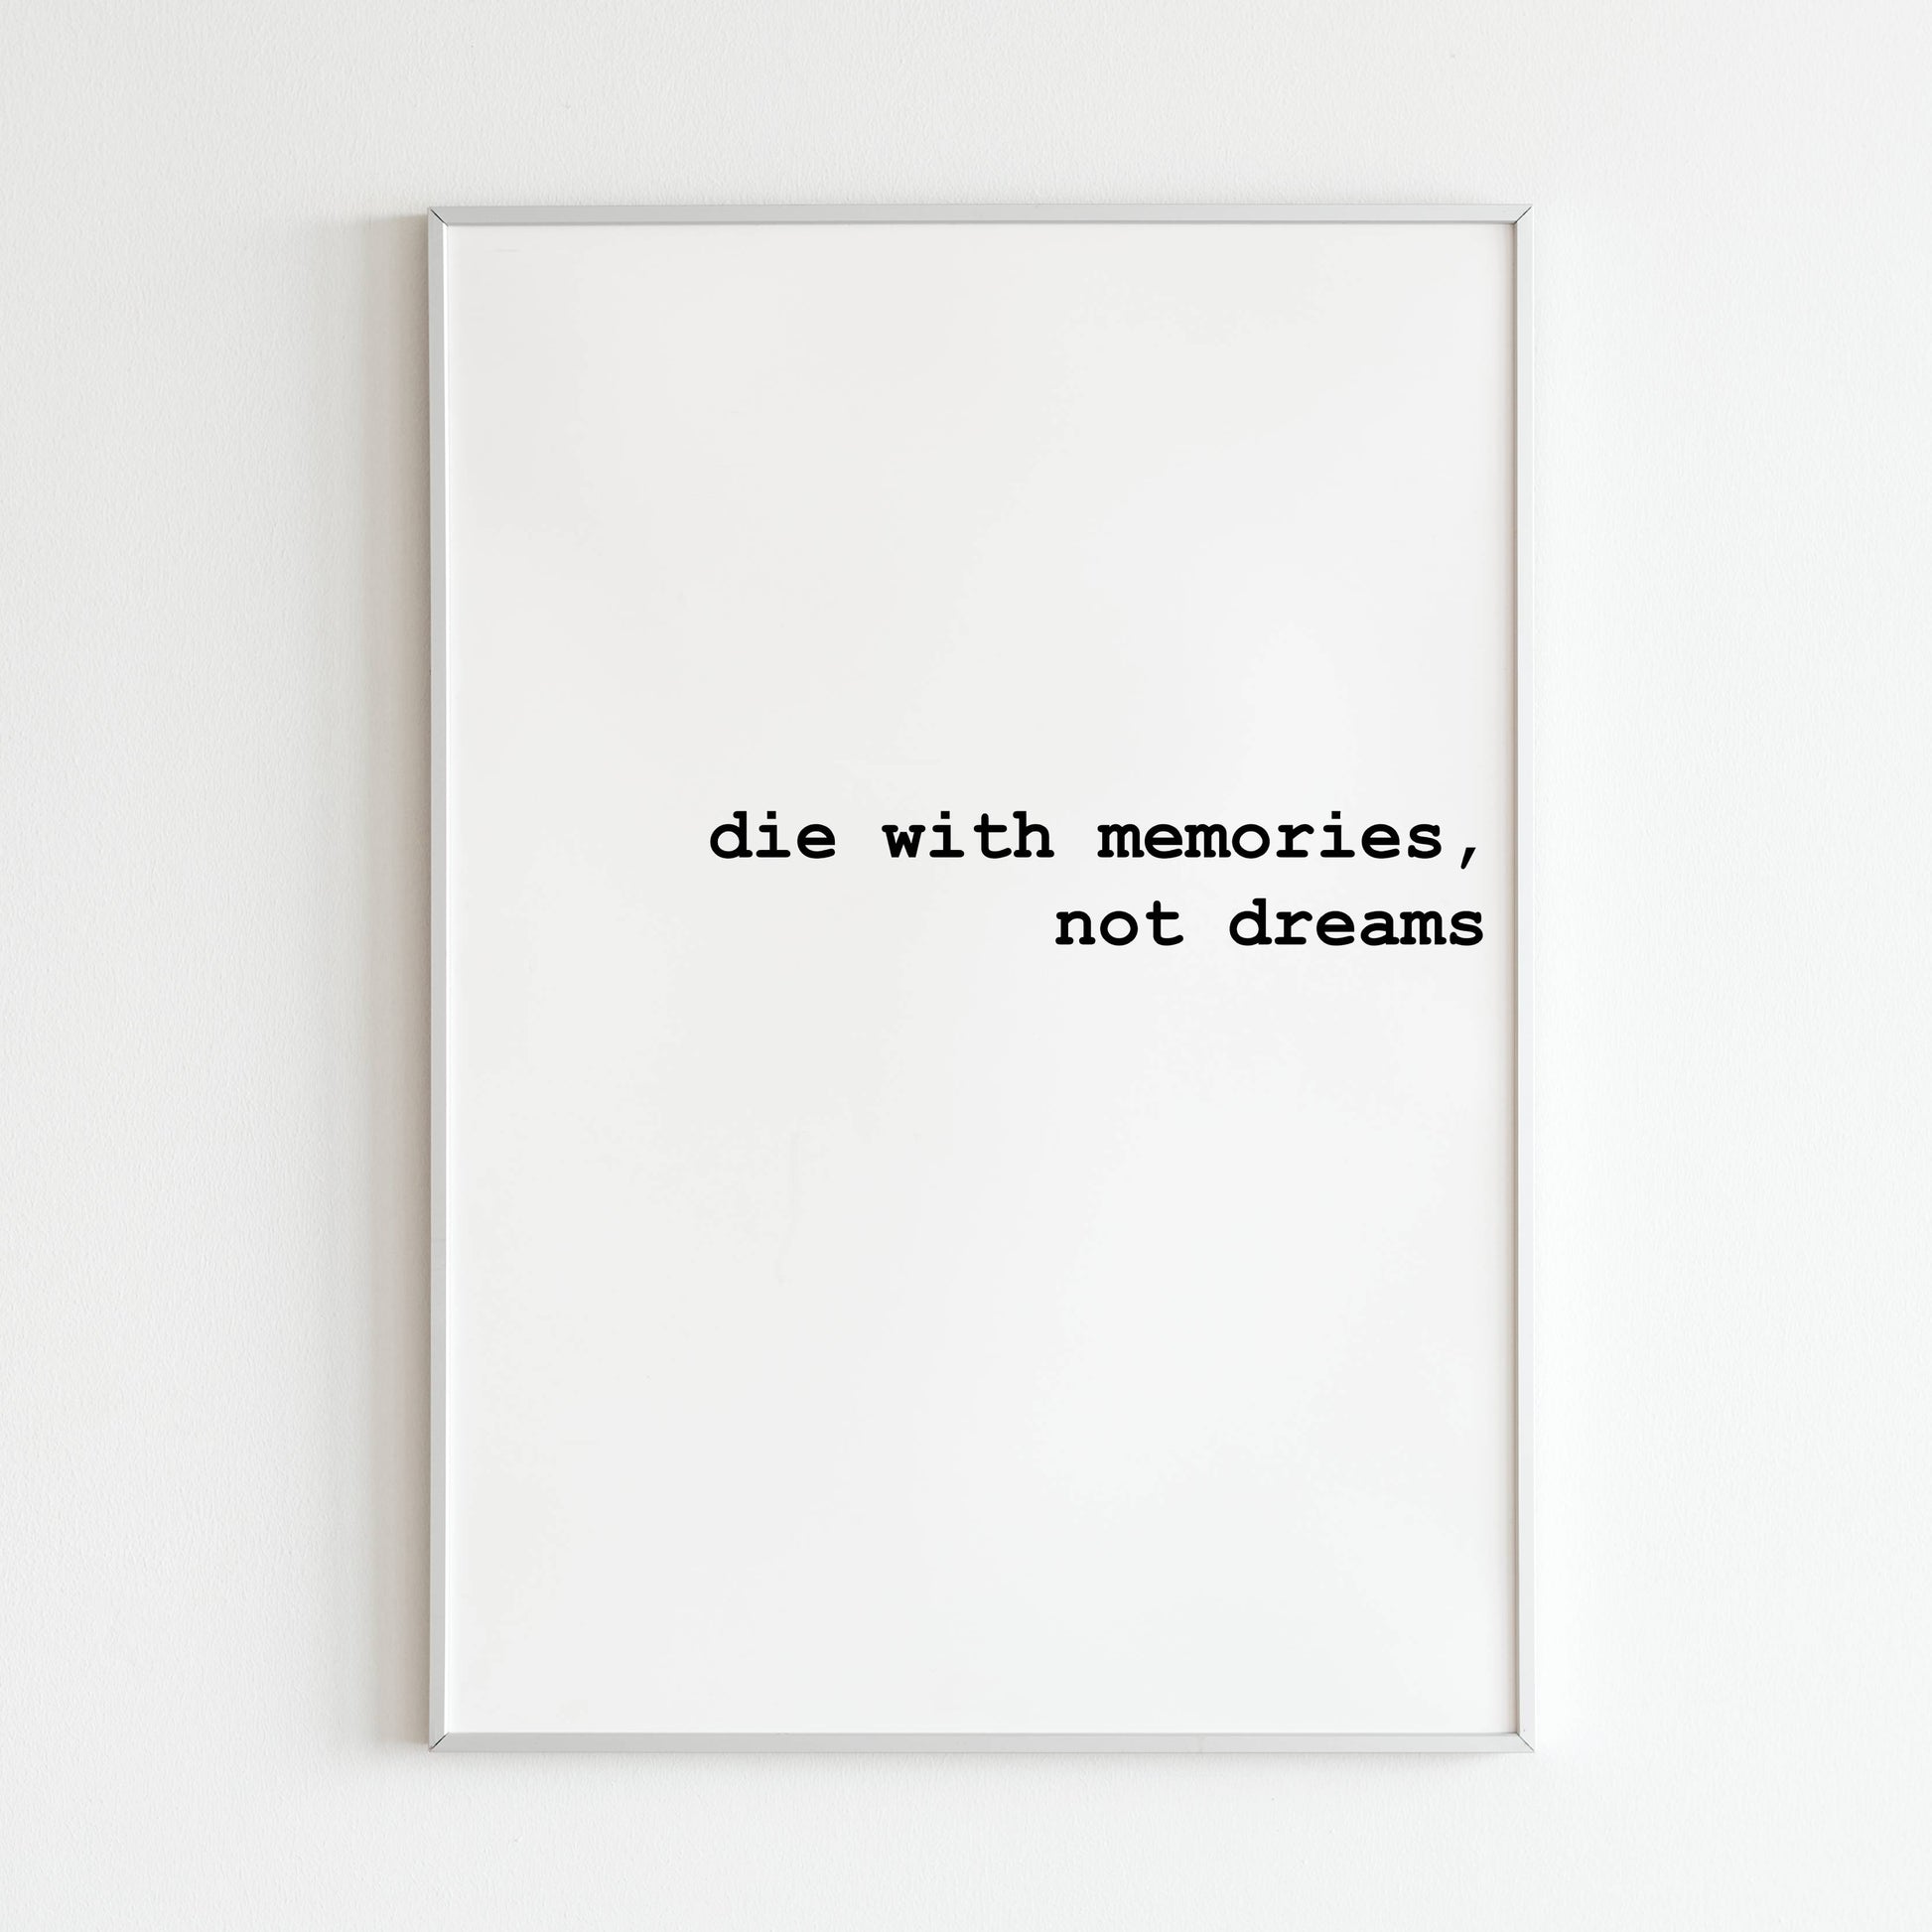 Downloadable "Die with memories not dreams" art print, inspire a life filled with experiences and fulfillment.